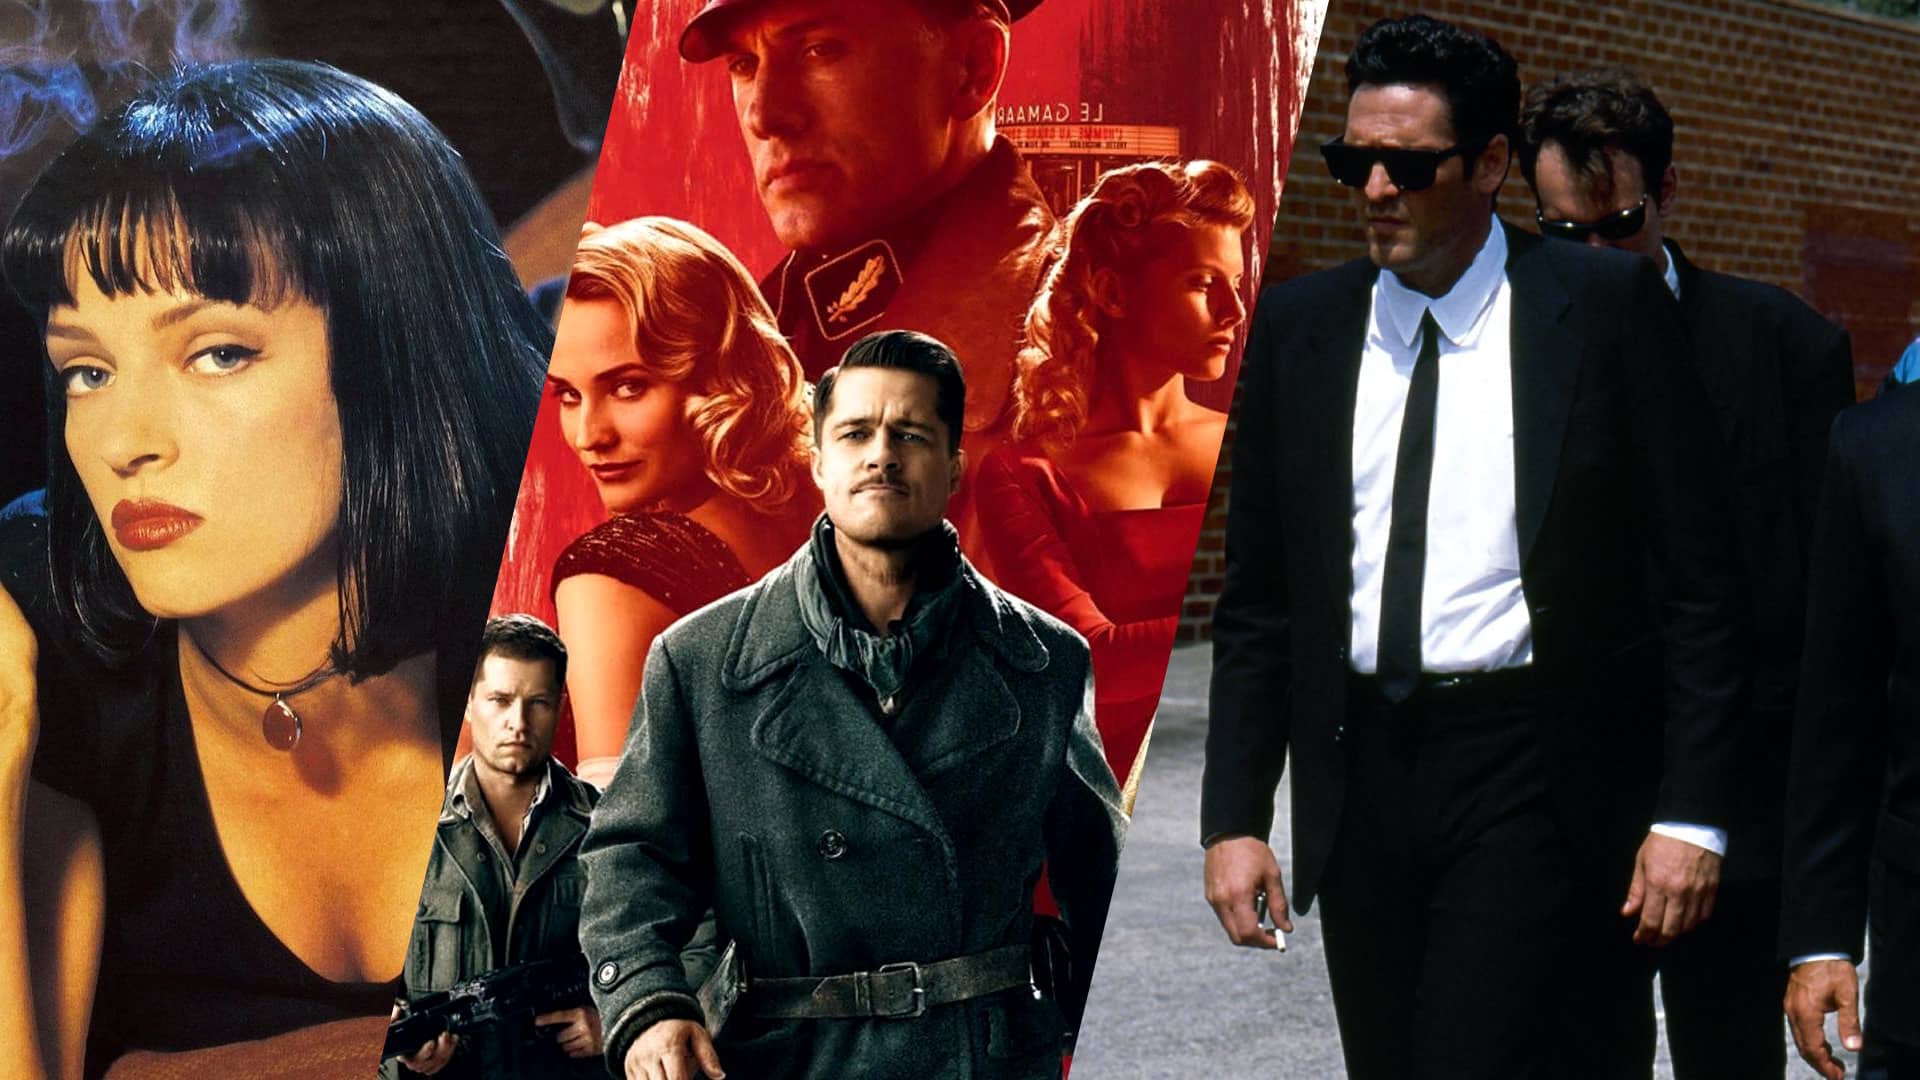 Best Quentin Tarantino Movies Ranked for Filmmakers